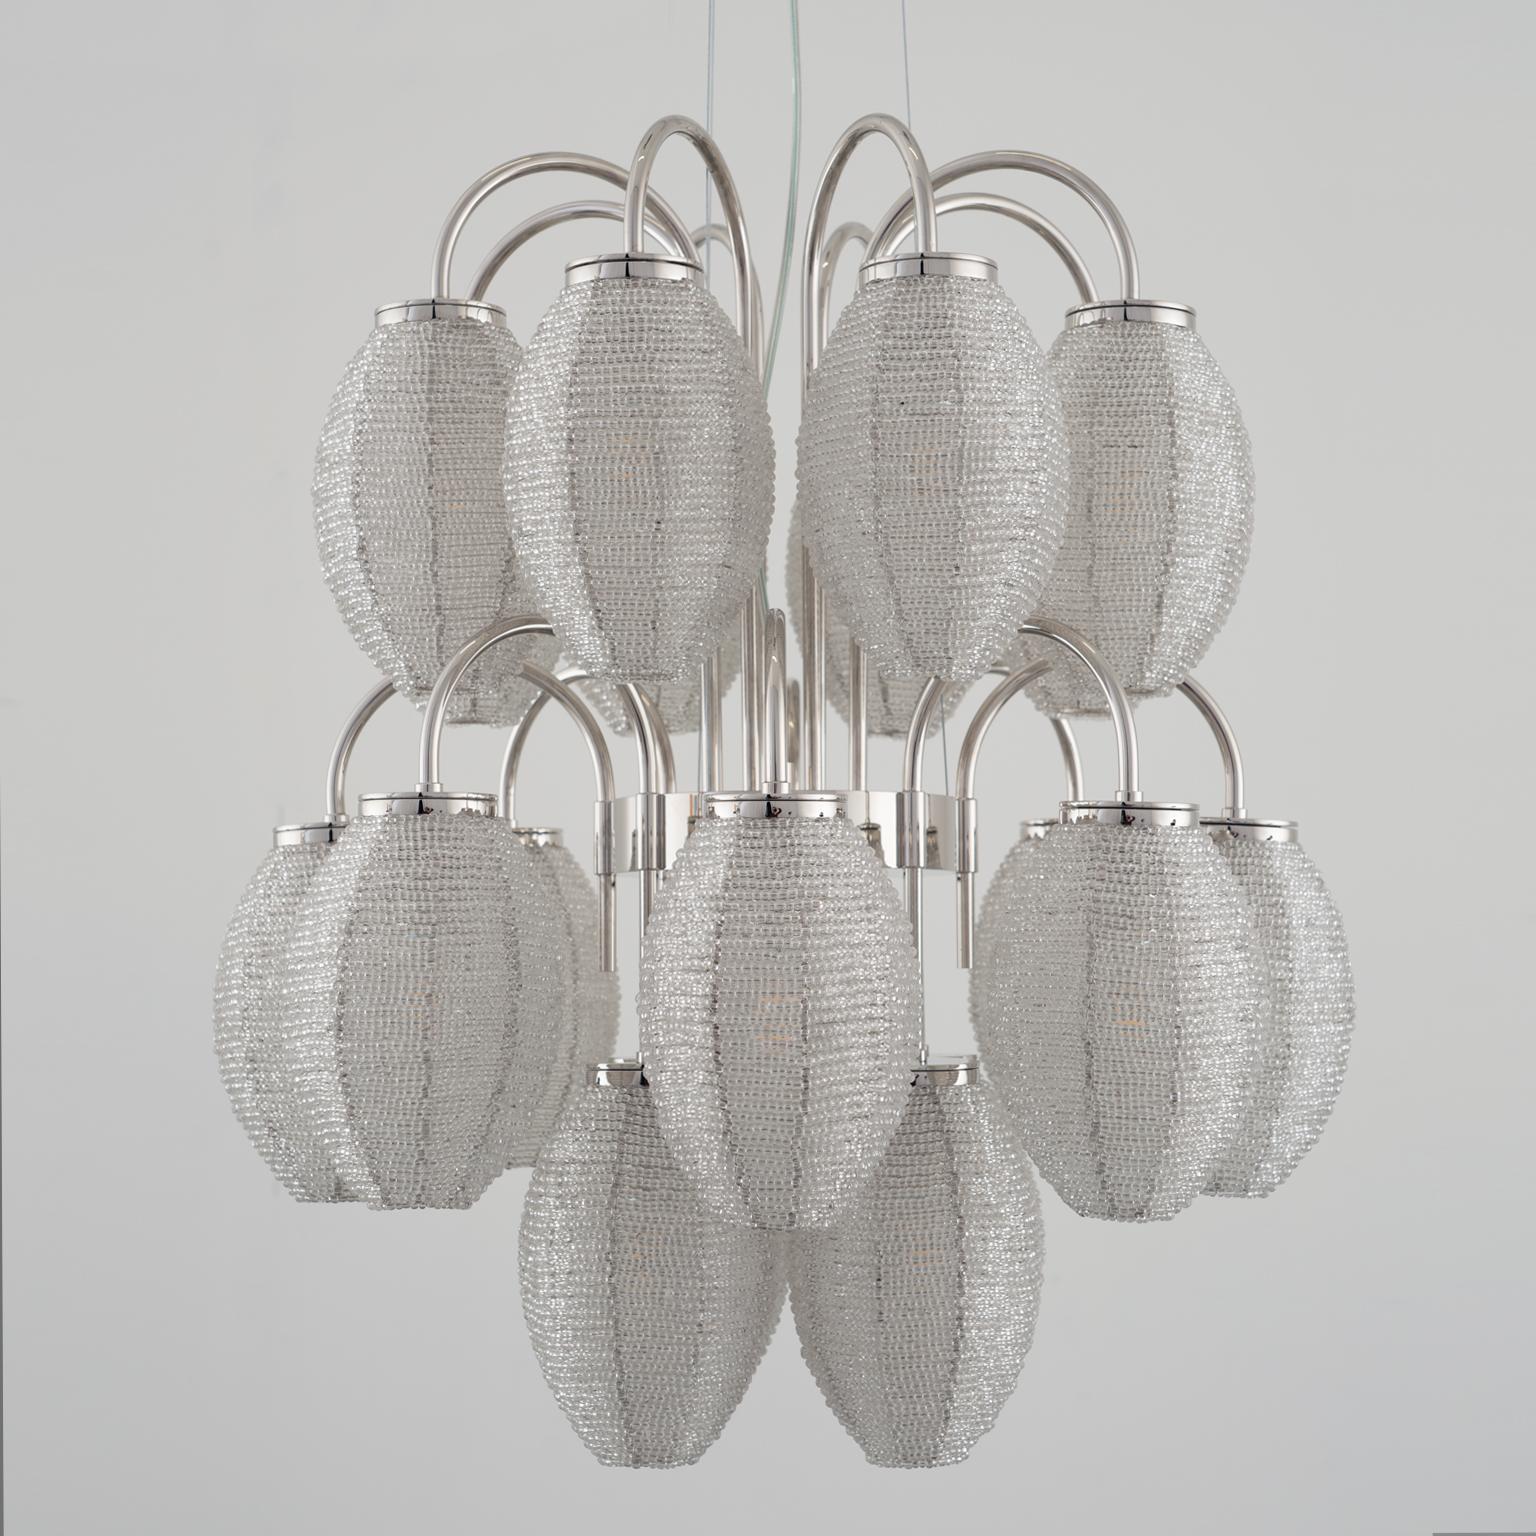 Threethousandsixhundredtwentyeight pearls, one strand. Candid lampshades that remind of precious buds whose design combines the delicacy and the strength of a full bloom together, stopping time a moment before it took place. A way to preserve its